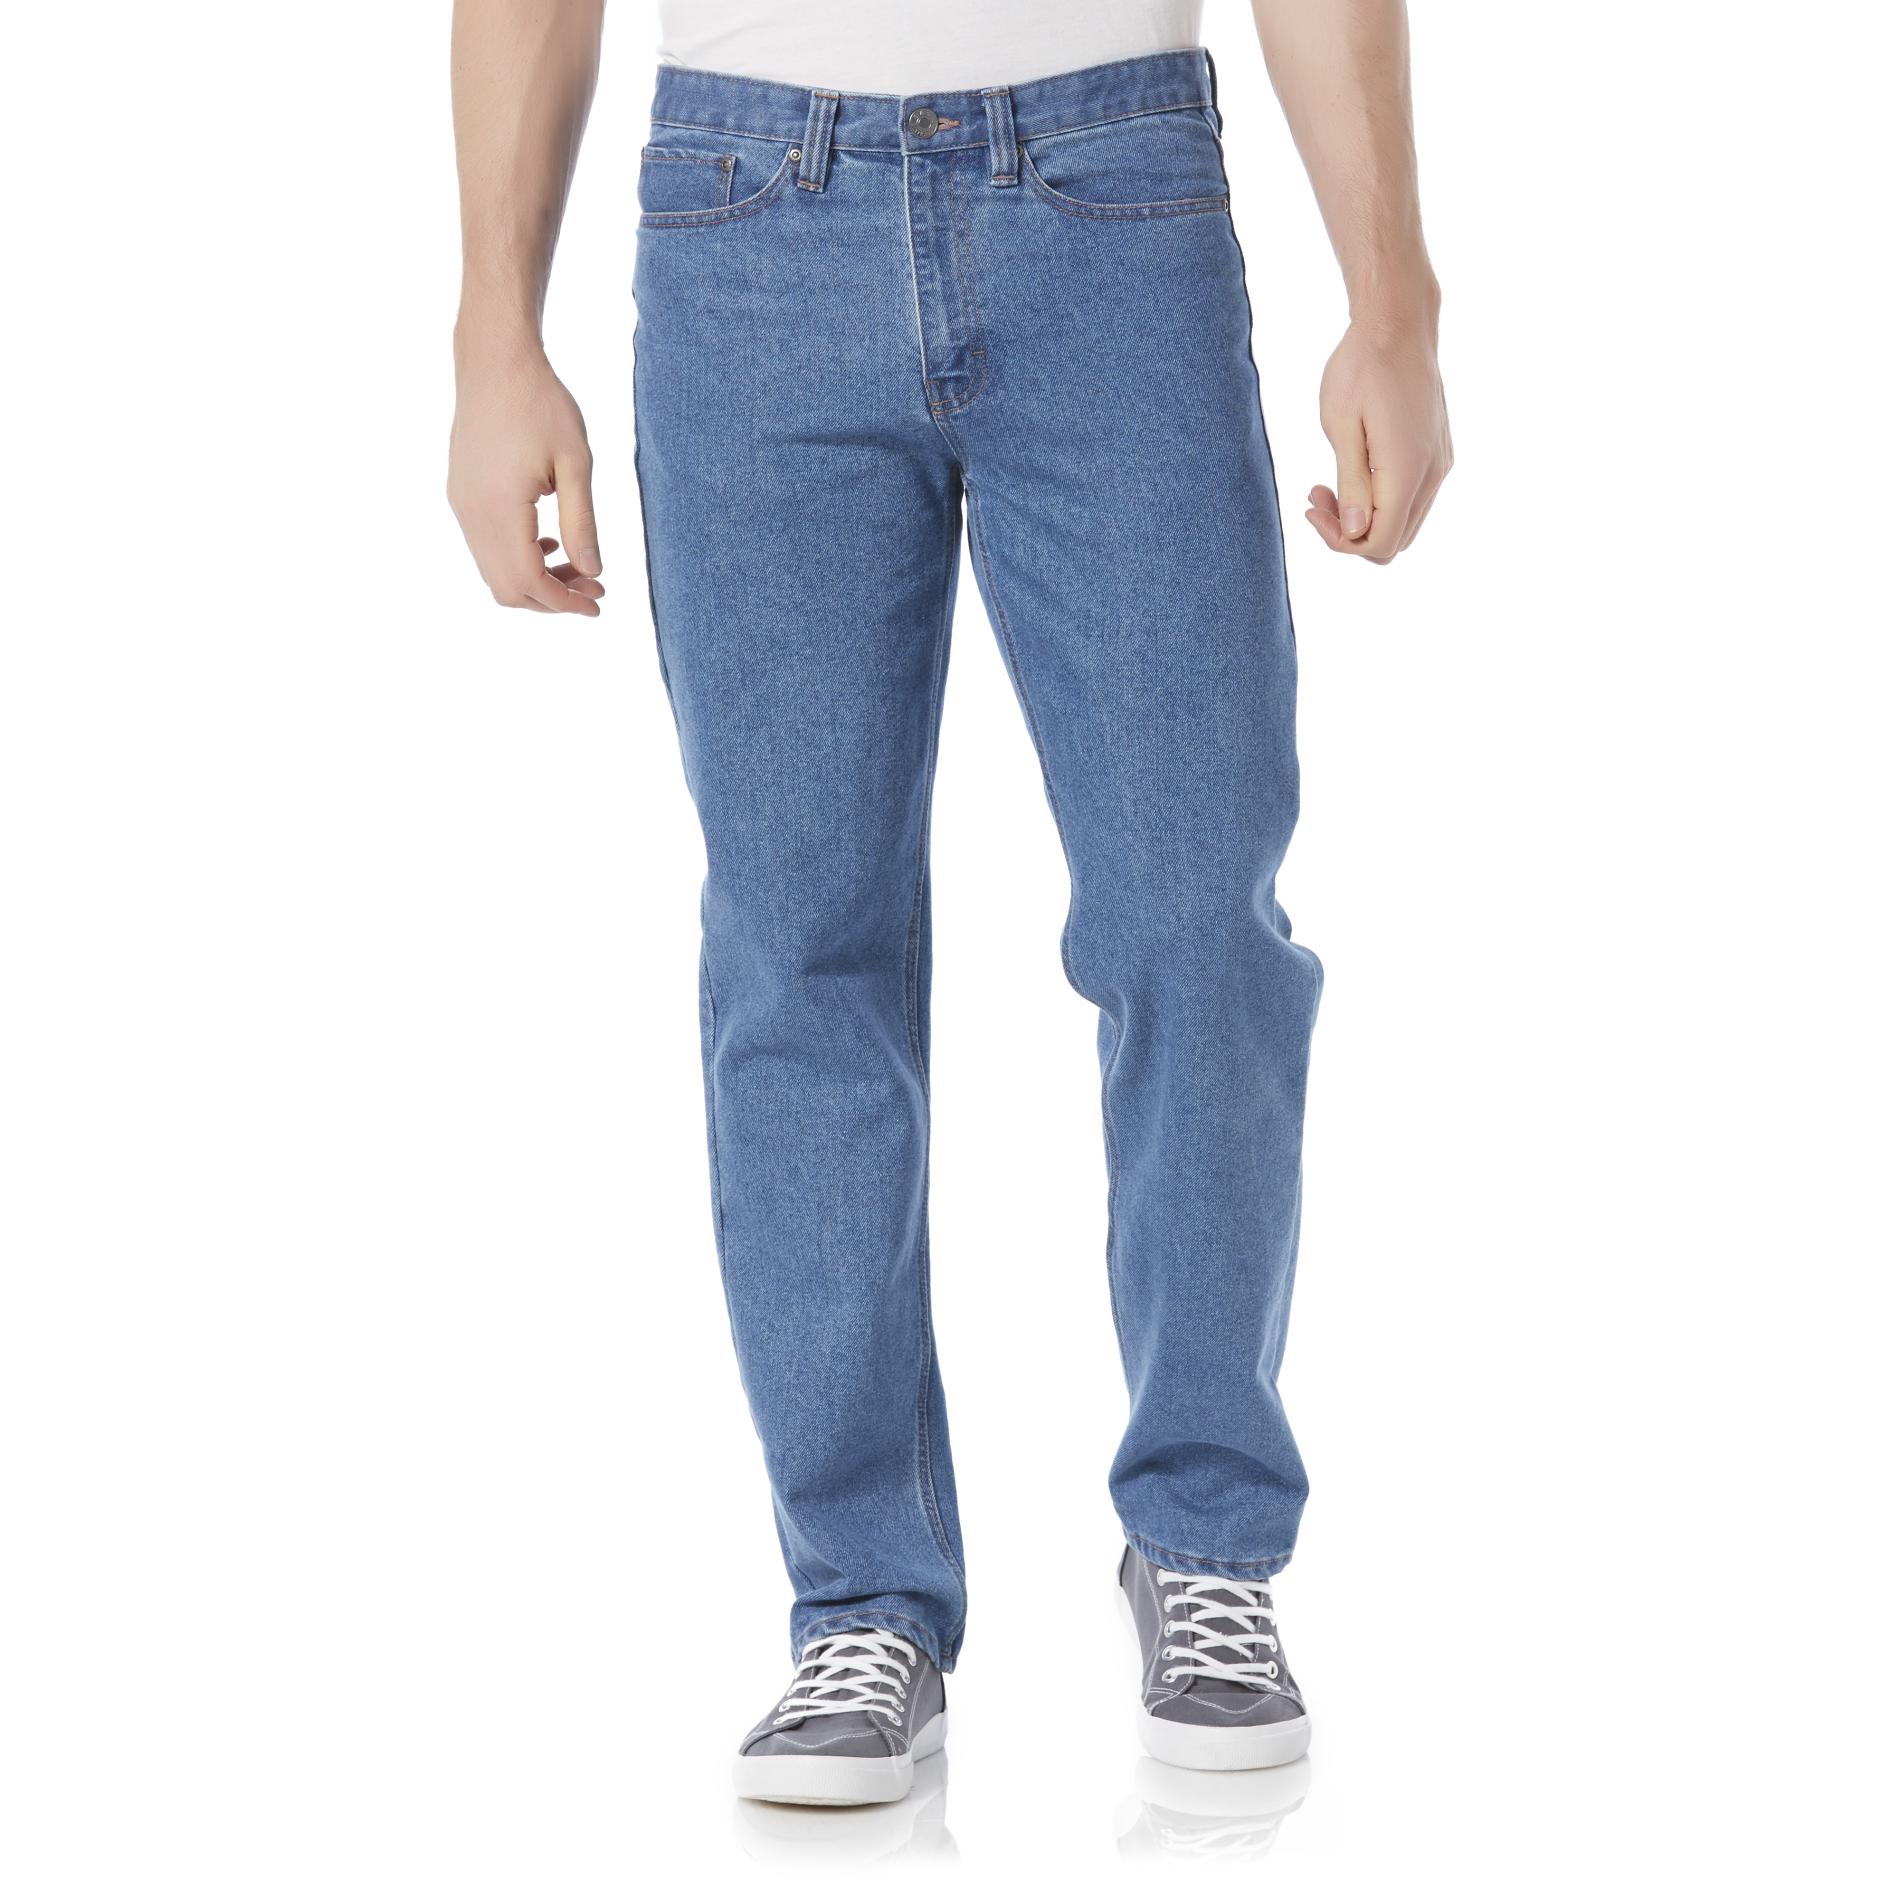 Basic Editions Men's Regular Fit Jeans | Shop Your Way: Online Shopping ...